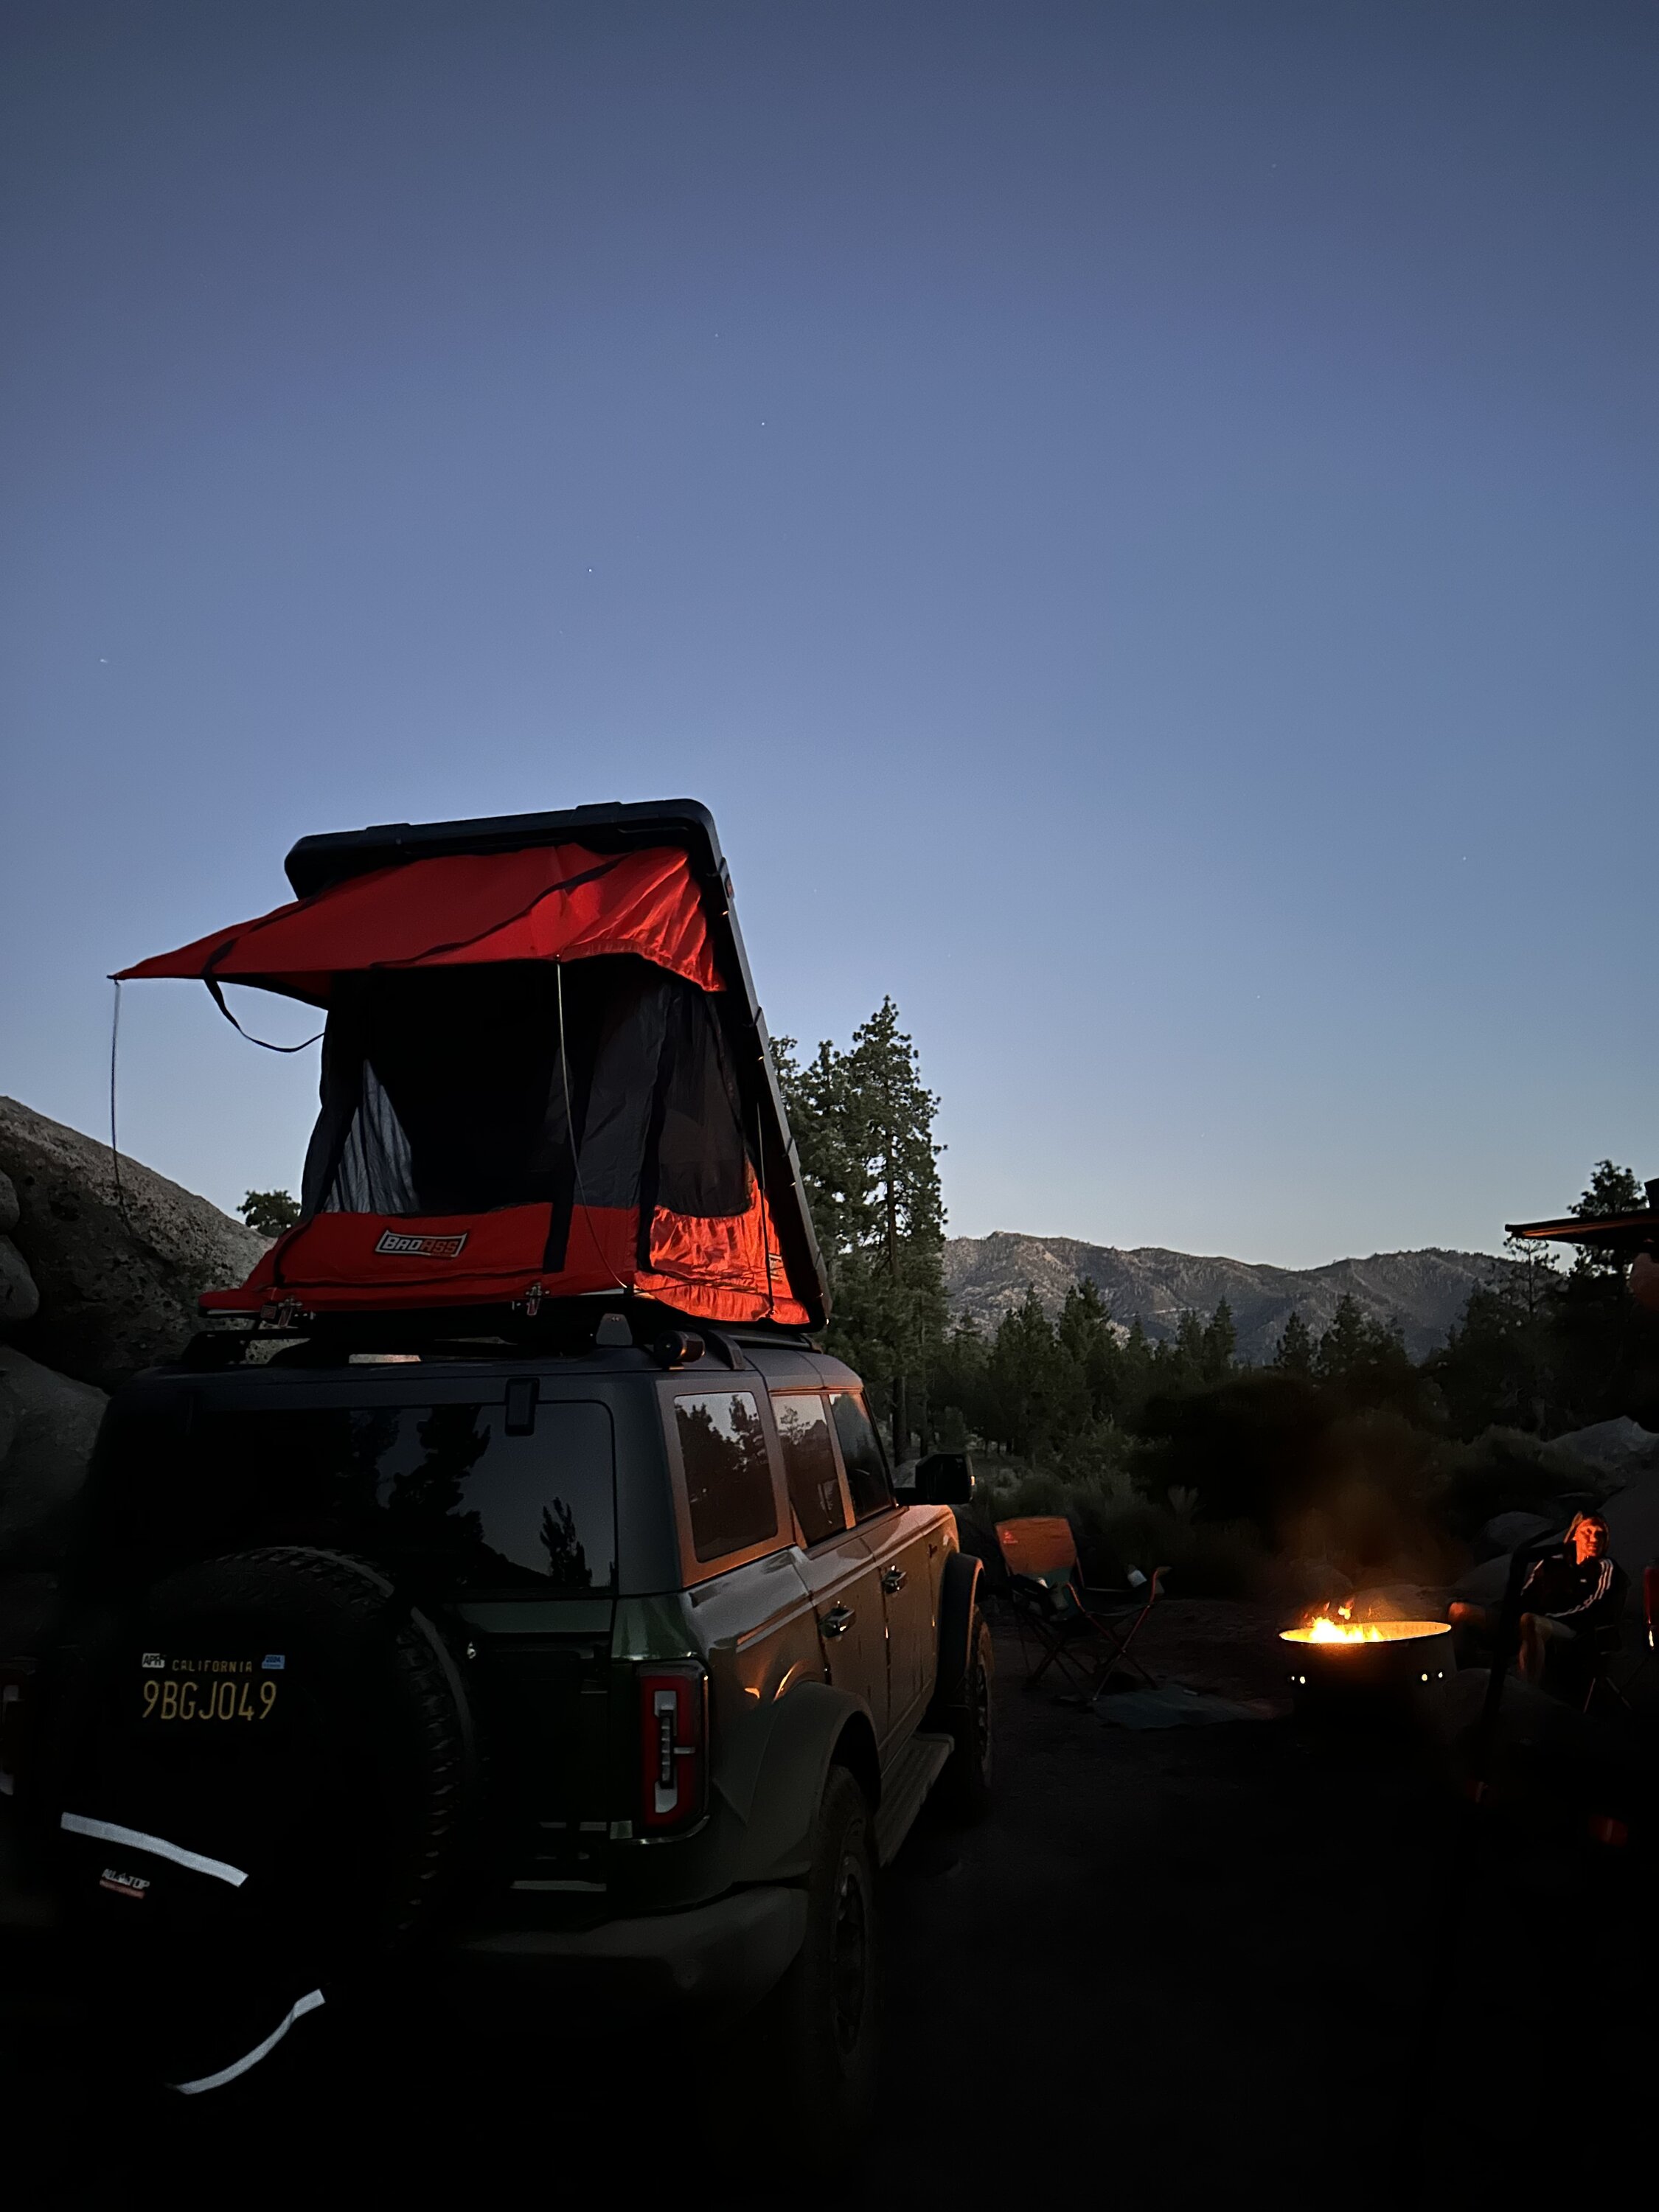 Ford Bronco Bronco Boondockers! Show your rig, camper, roof top tent RTT 🏕️ IMG_4296